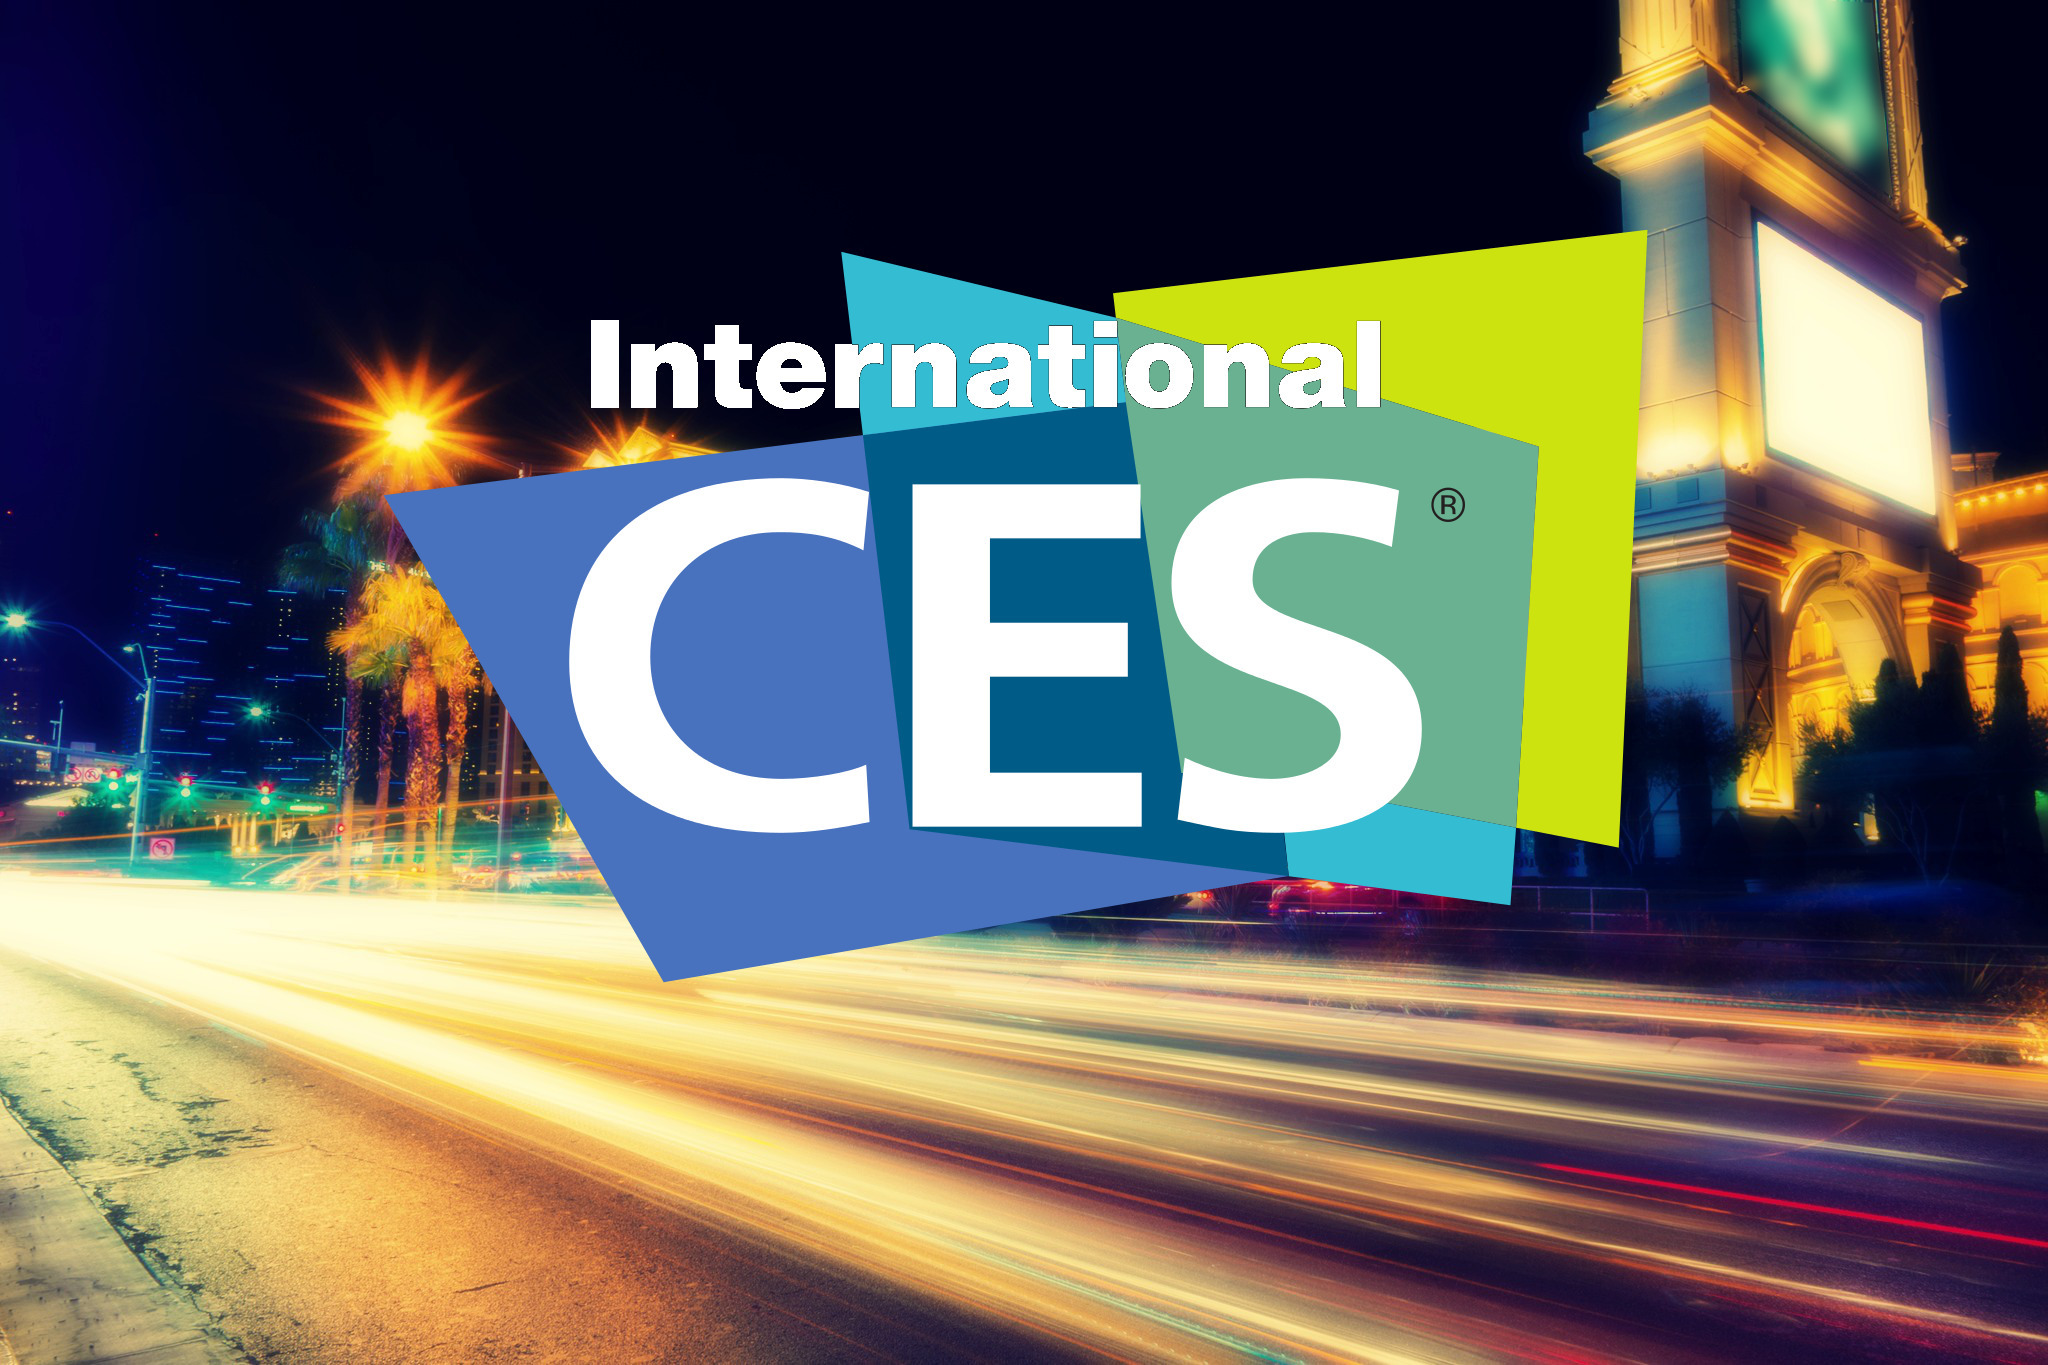 Looking Forward to Our Coverage of CES 2016